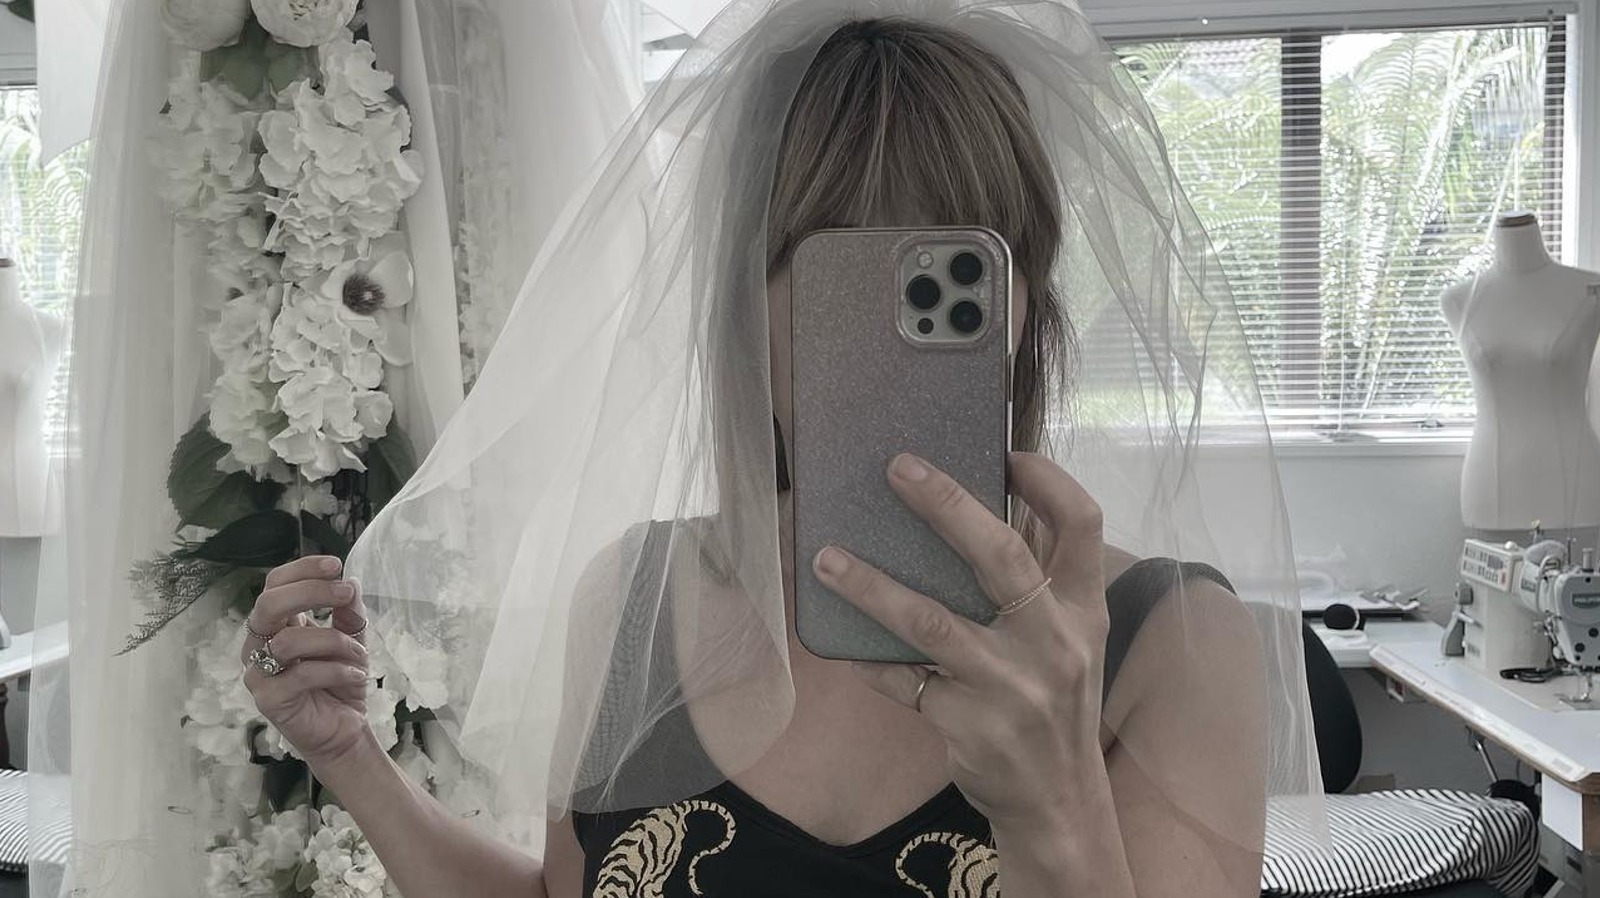 https://www.glam.com/img/gallery/short-veils-are-the-bridal-silhouette-that-gives-old-hollywood-glamour-to-your-wedding-look/l-intro-1685545982.jpg